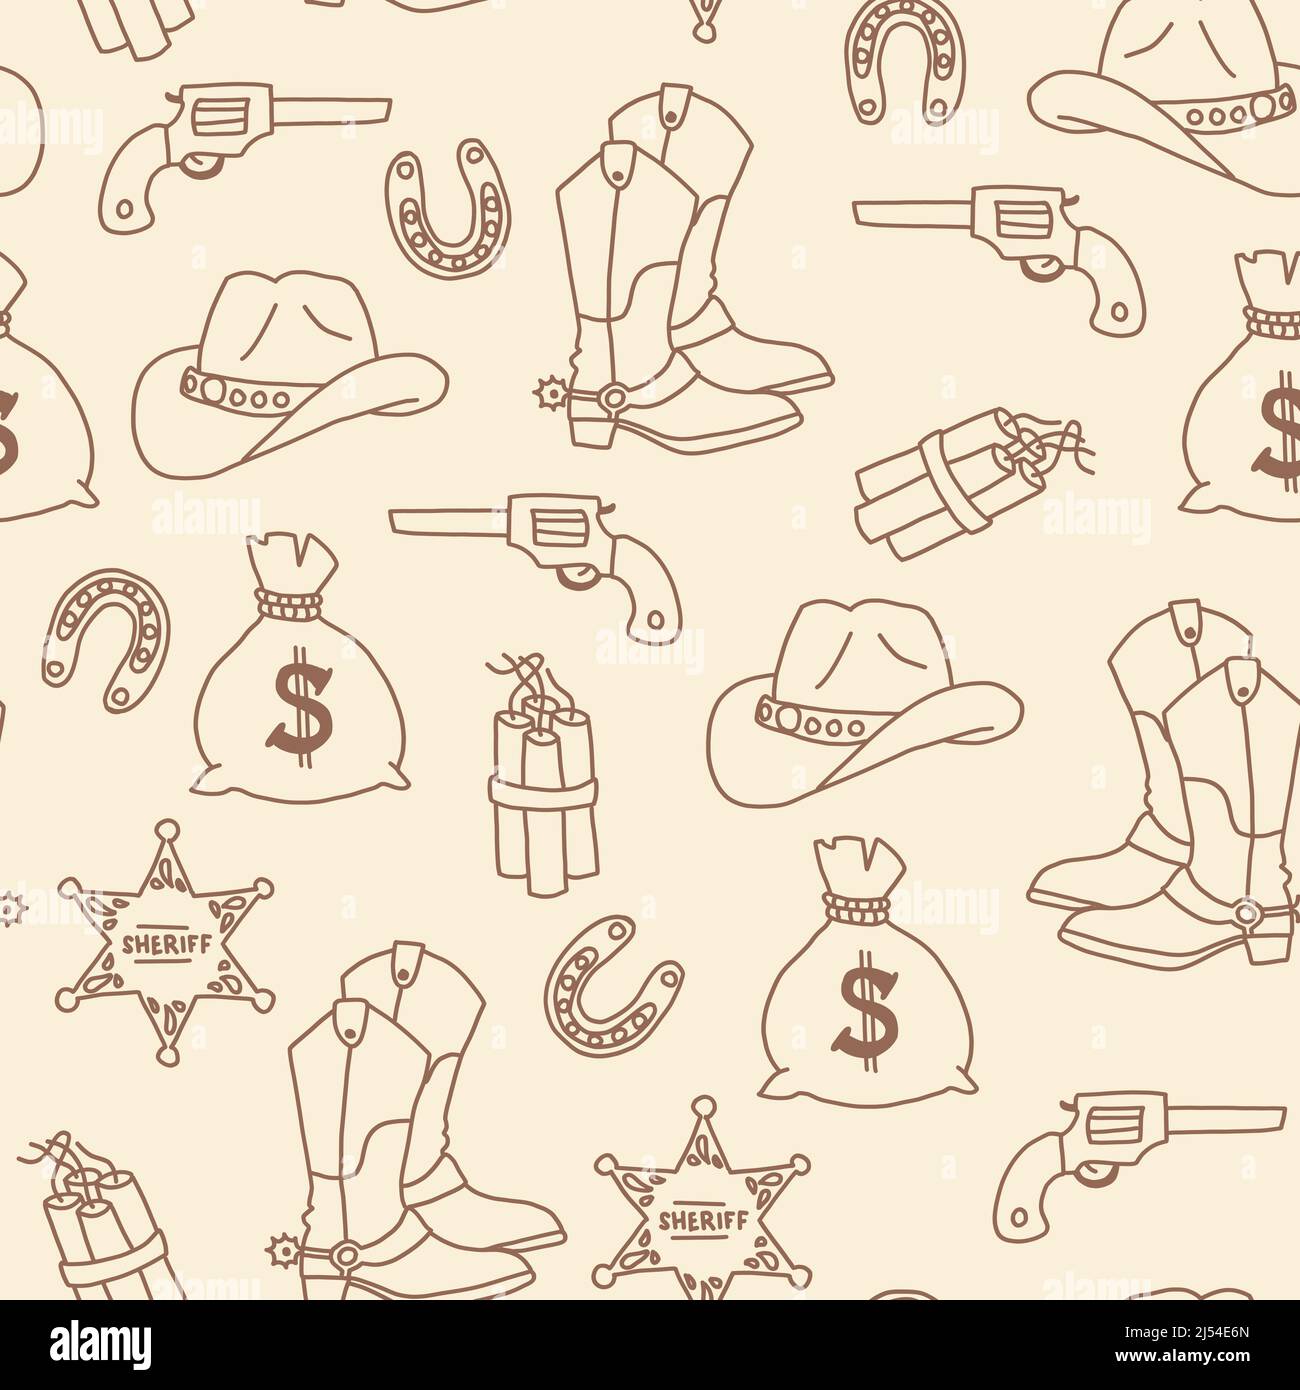 Cowboy Sheriff Wild West seamless vector pattern. Cowboy boots and hat, money bag, dynamite, sheriff star repeating background. Wild West design for Stock Vector